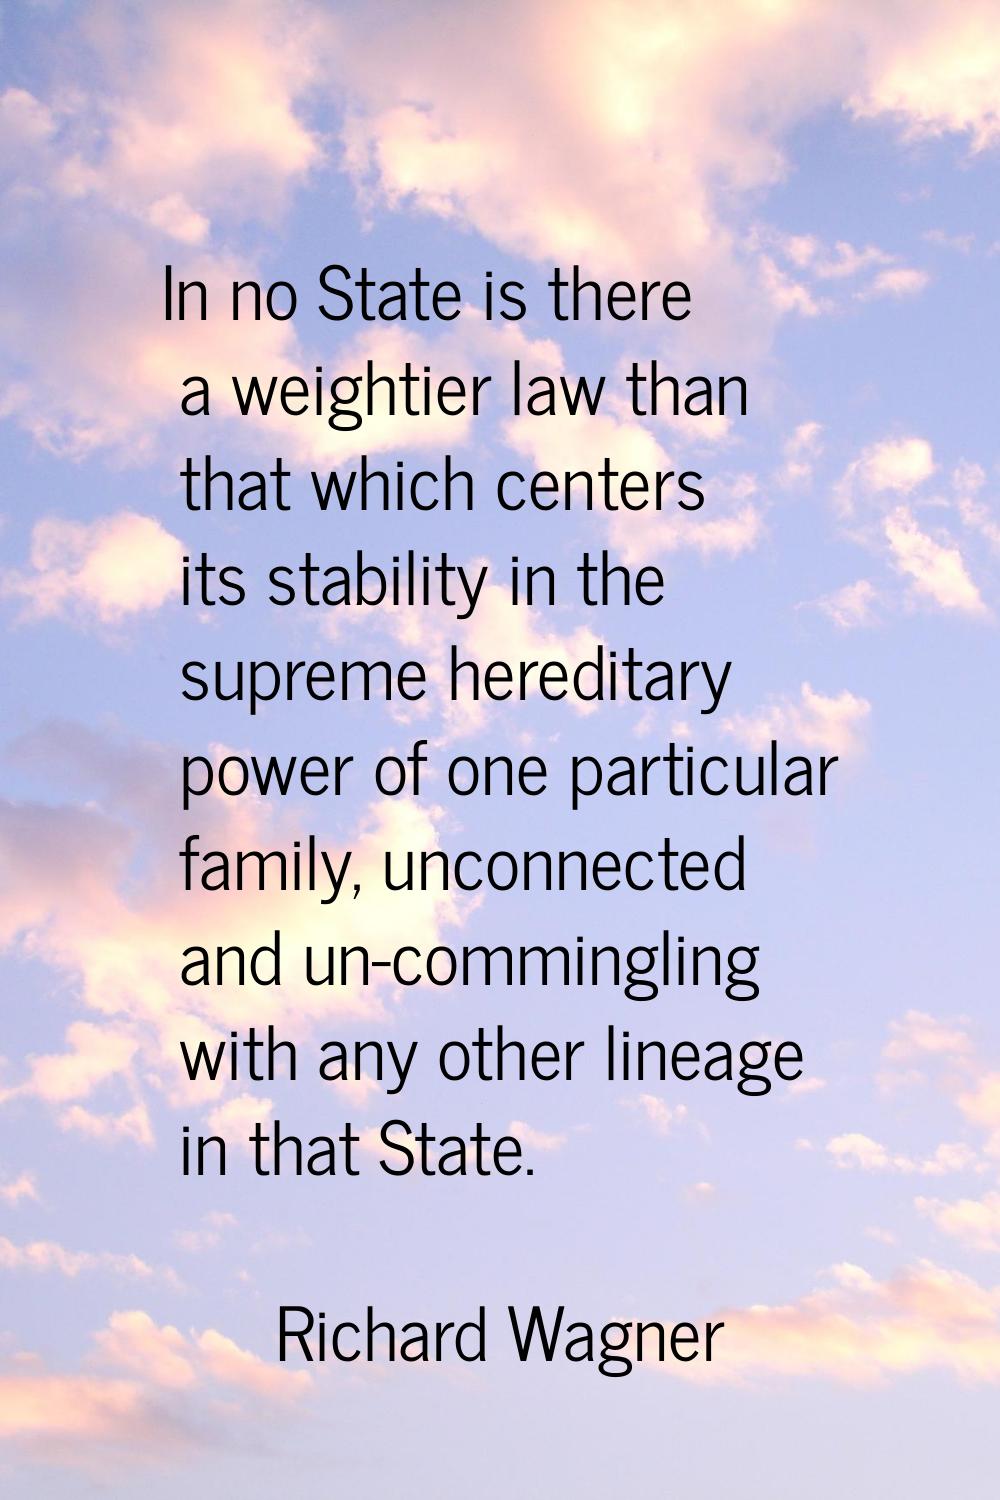 In no State is there a weightier law than that which centers its stability in the supreme hereditar